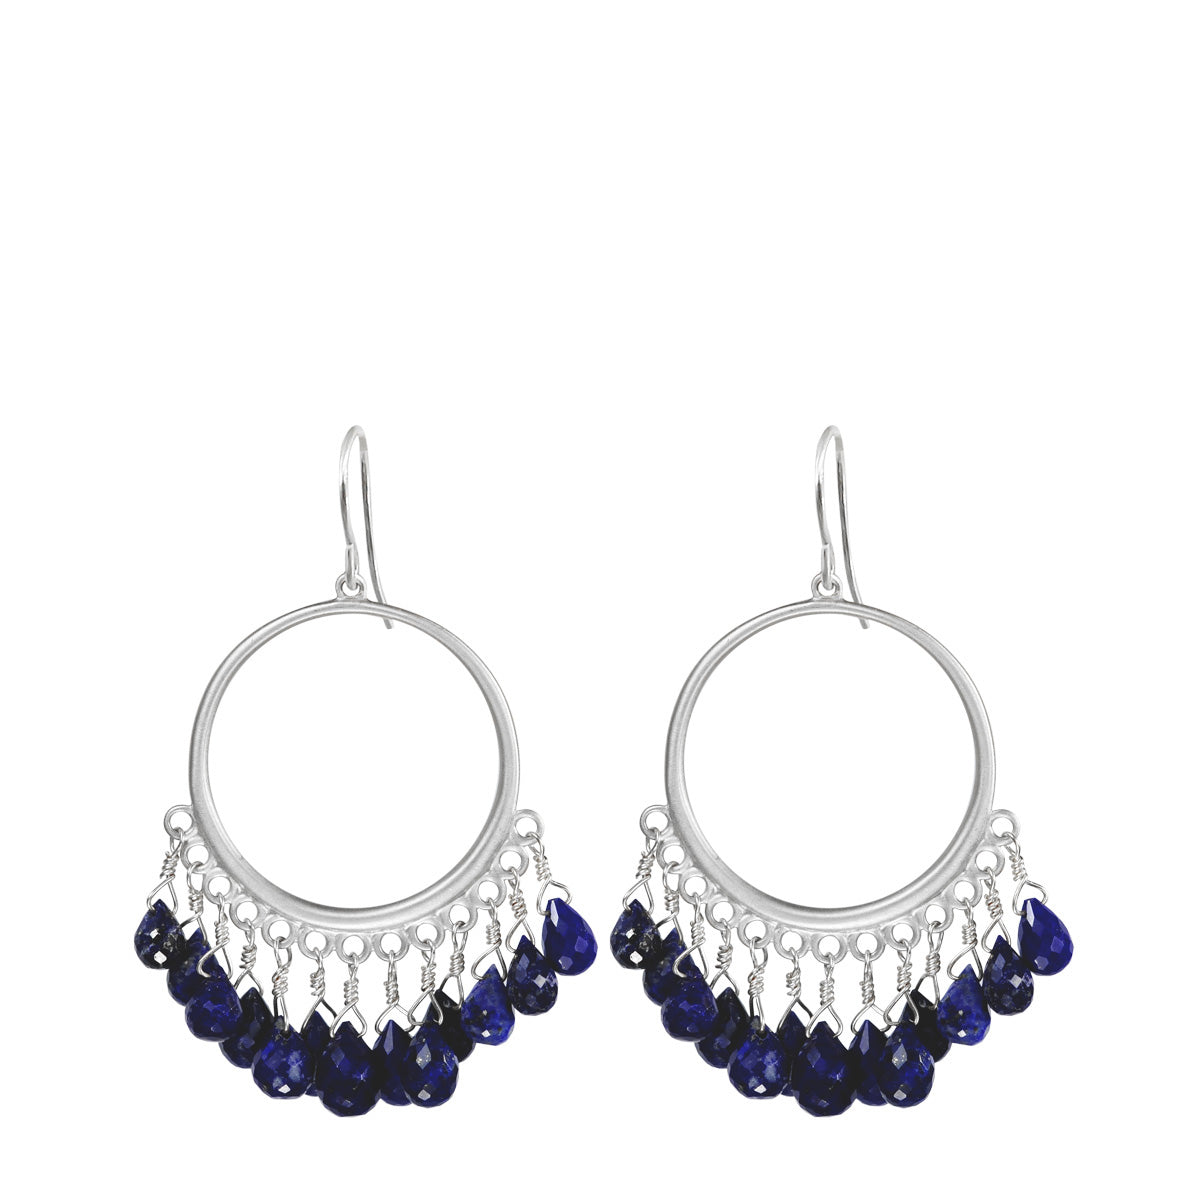 Sterling Silver Medium Circle Earrings with Lapis Briolettes